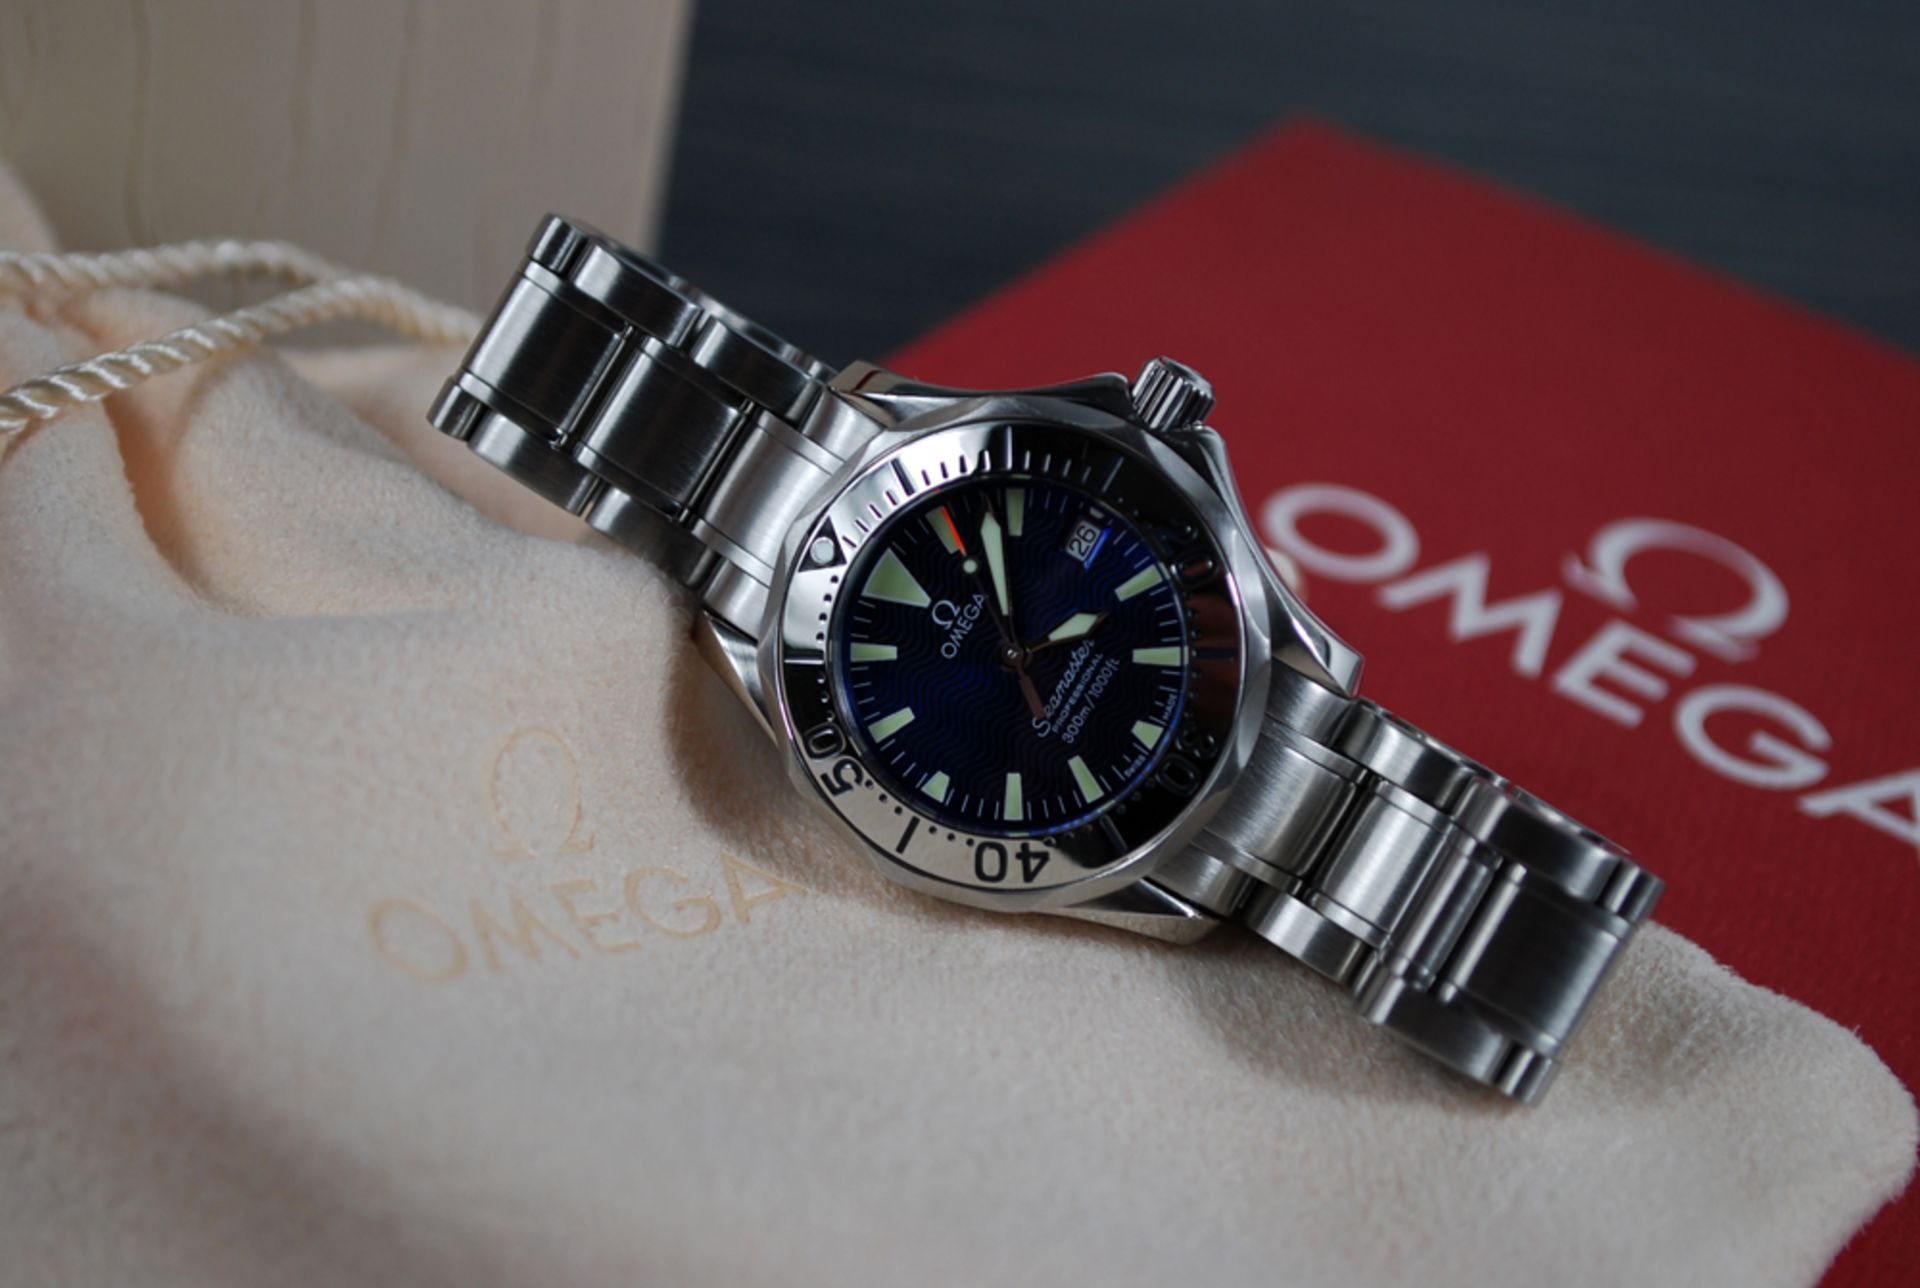 OMEGA SEAMASTER (Ladies) – '2285.80.00' Stainless Steel   Fantastic Watch - Condition: see imagery - Image 11 of 12